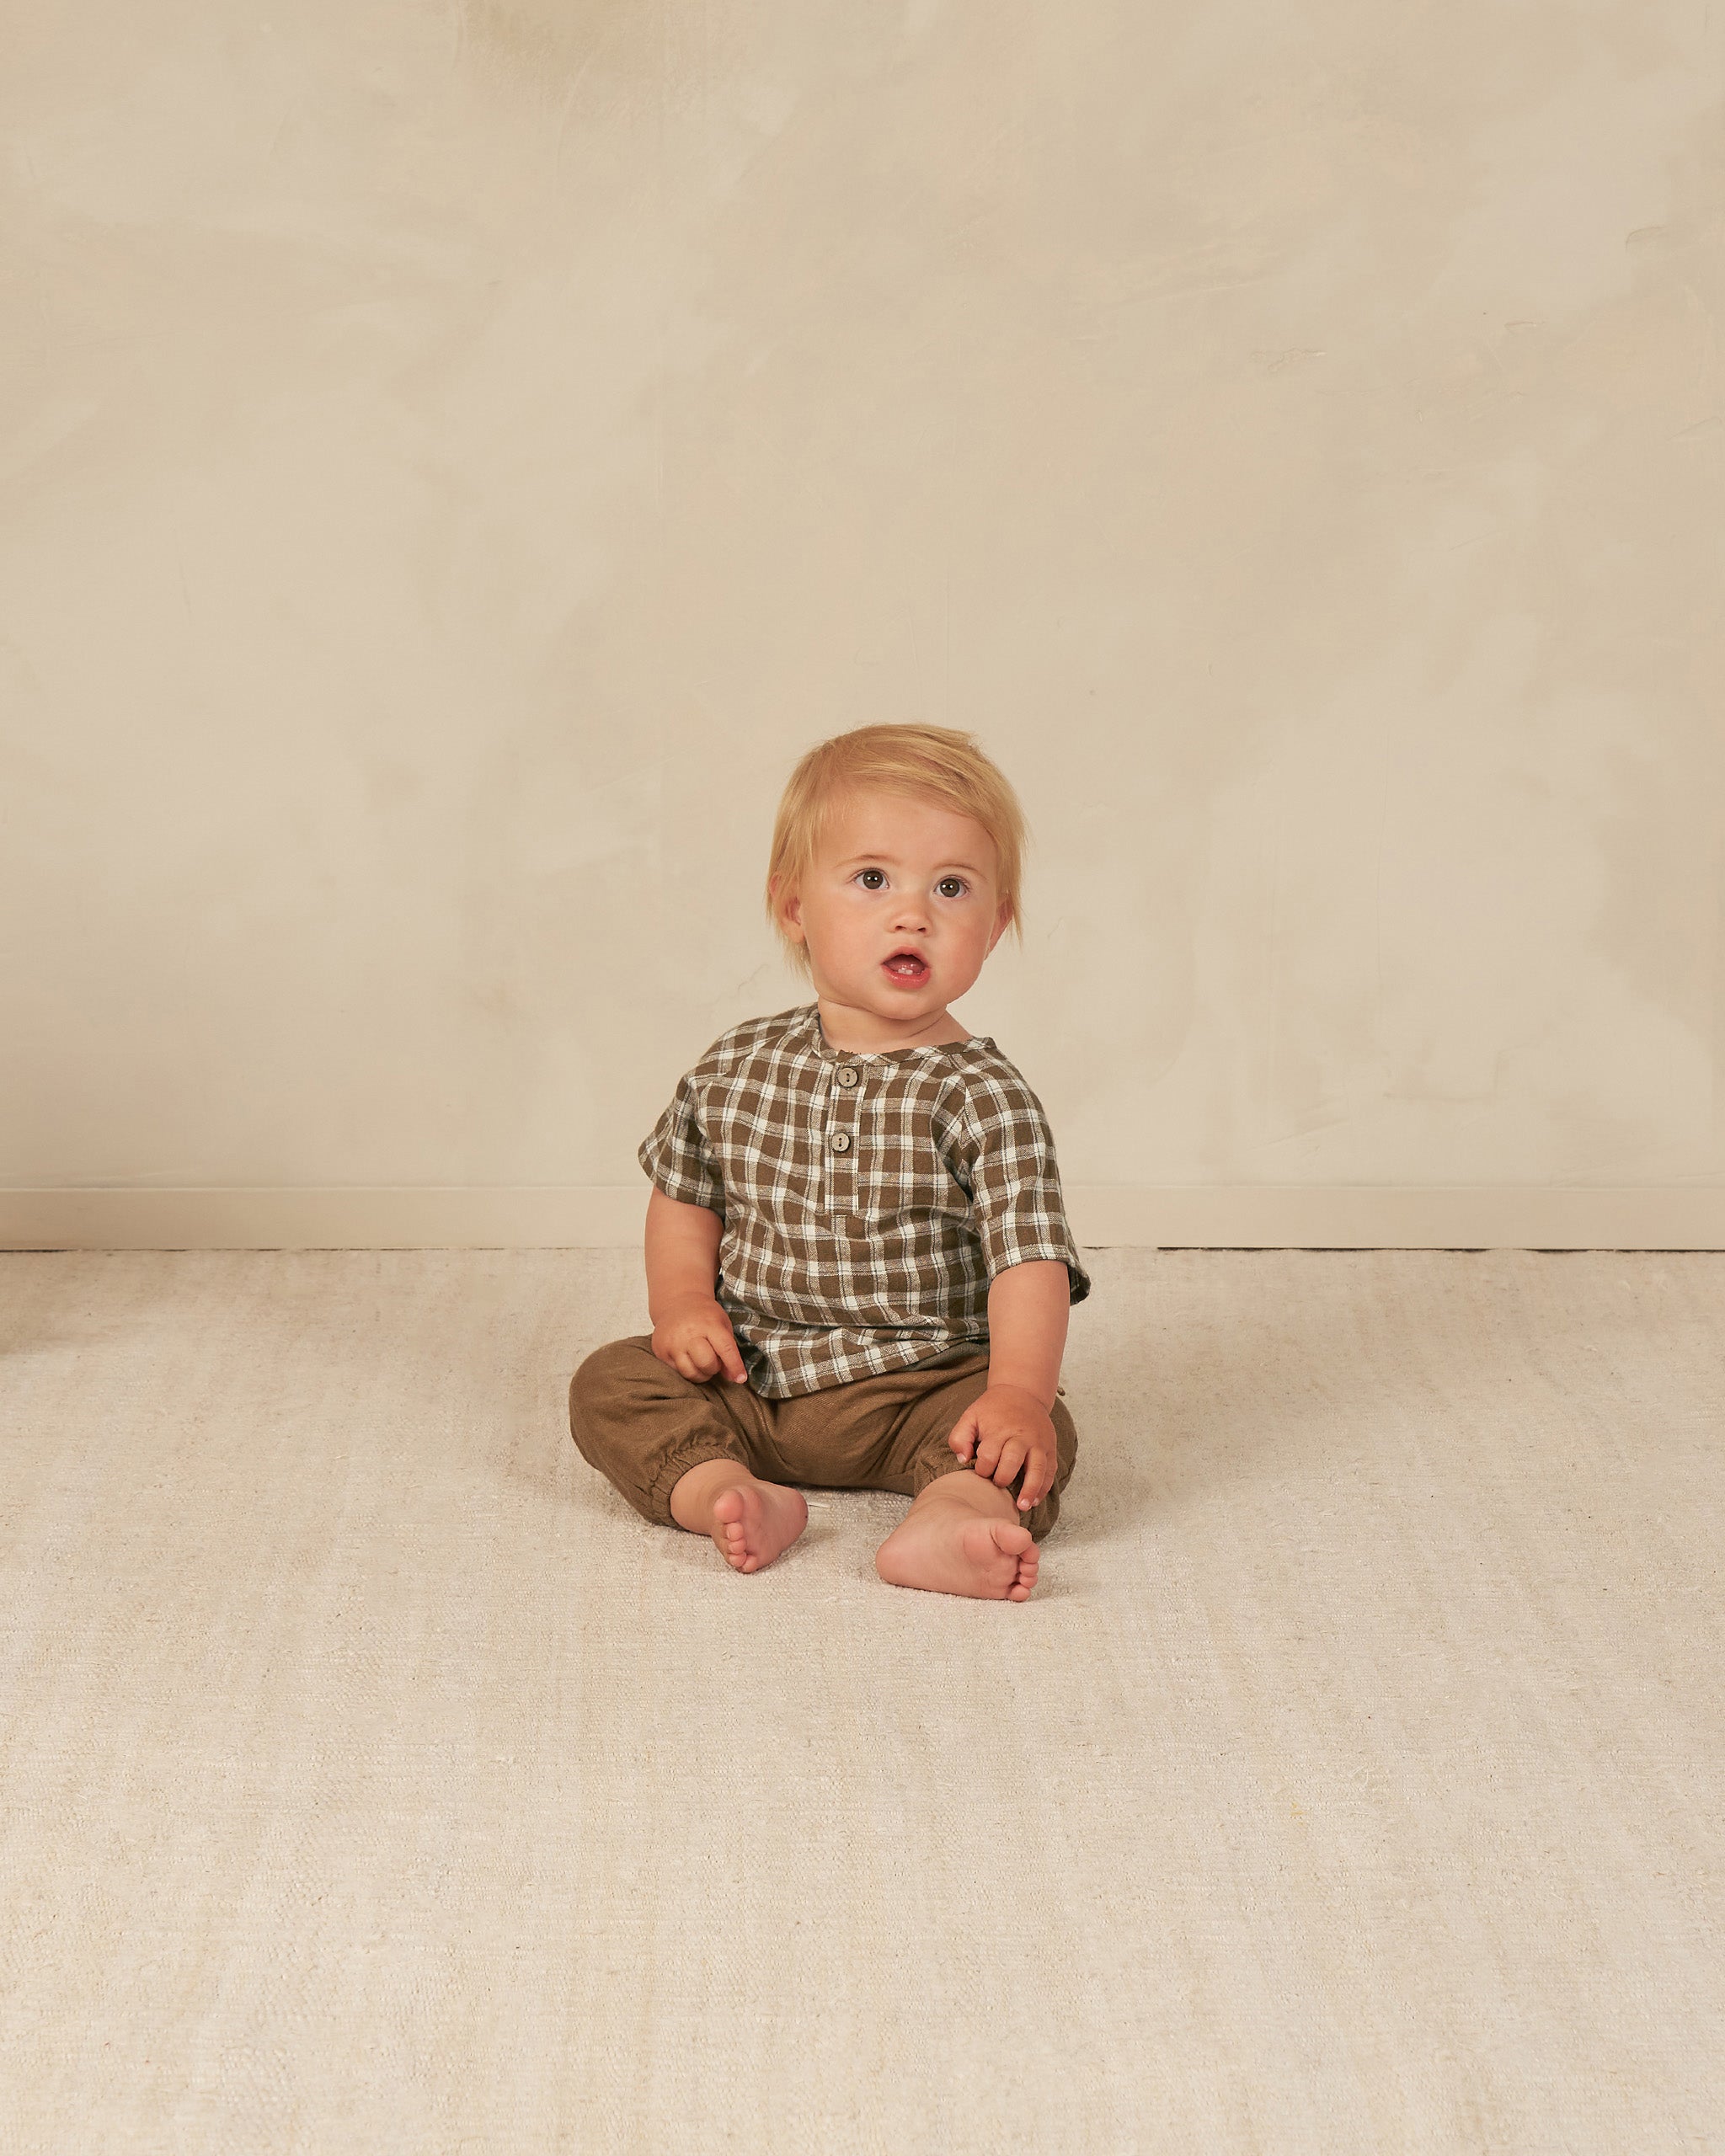 Woven Baby Pant || Saddle - Rylee + Cru | Kids Clothes | Trendy Baby Clothes | Modern Infant Outfits |